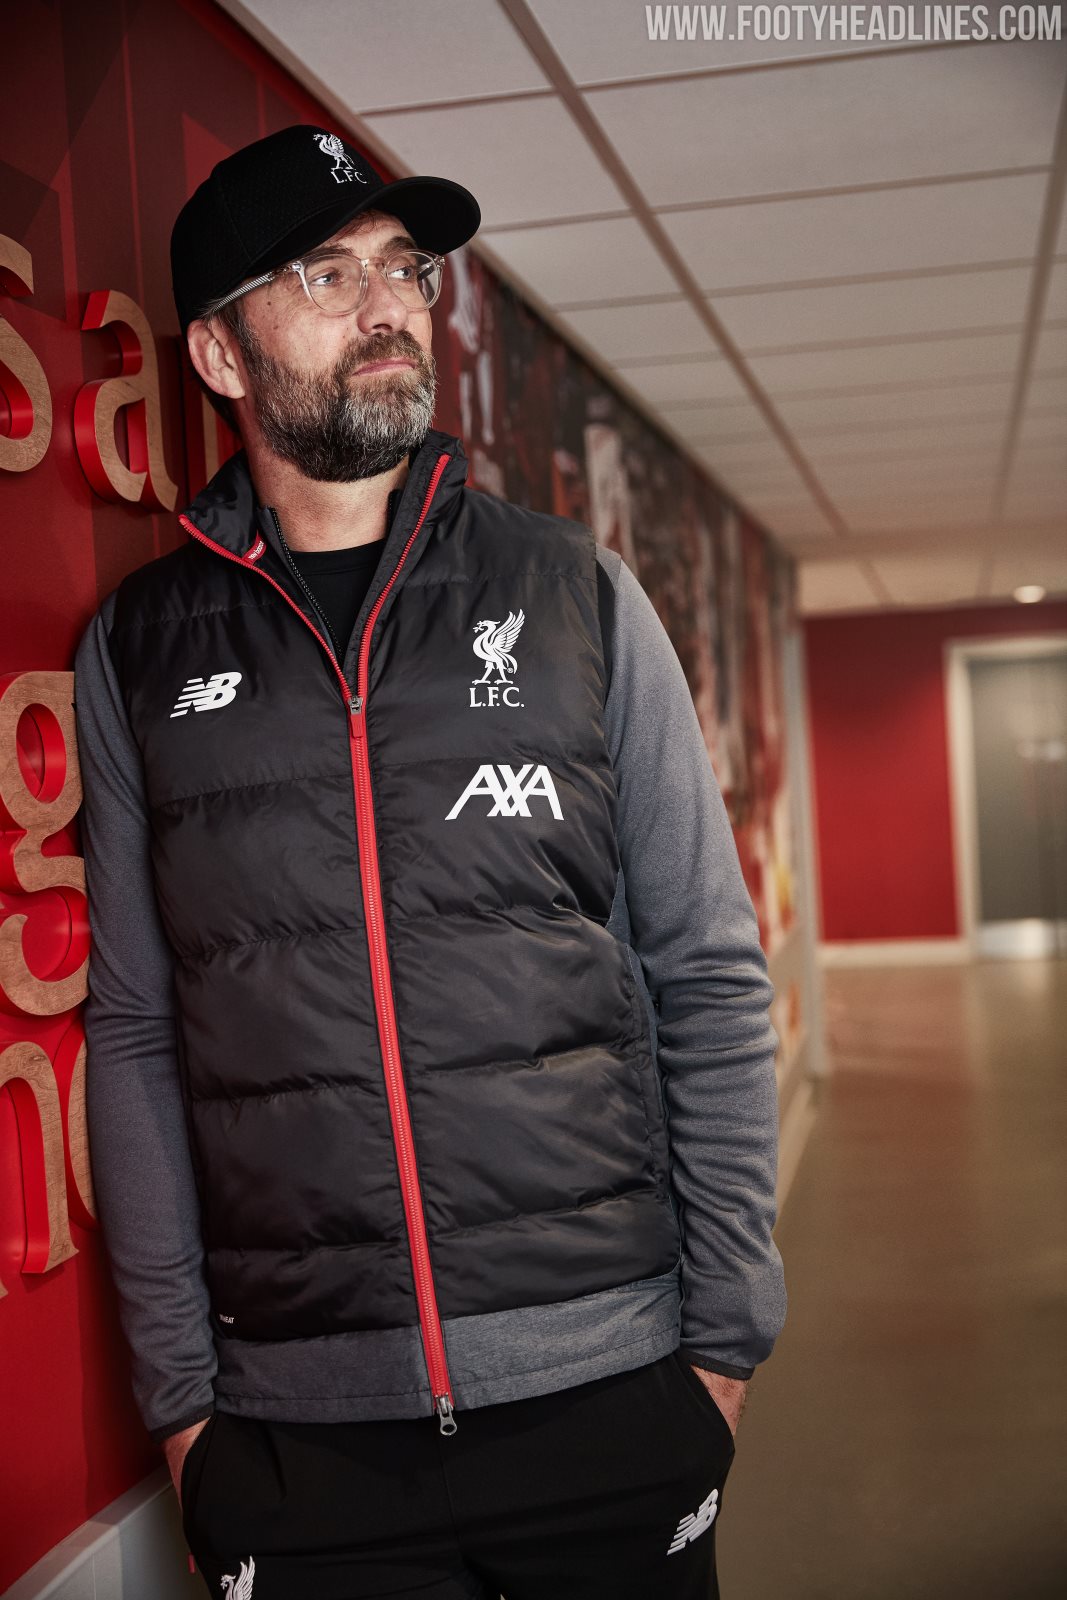 New Balance Liverpool 19-20 Klopp' Manager Collection - Footy Headlines